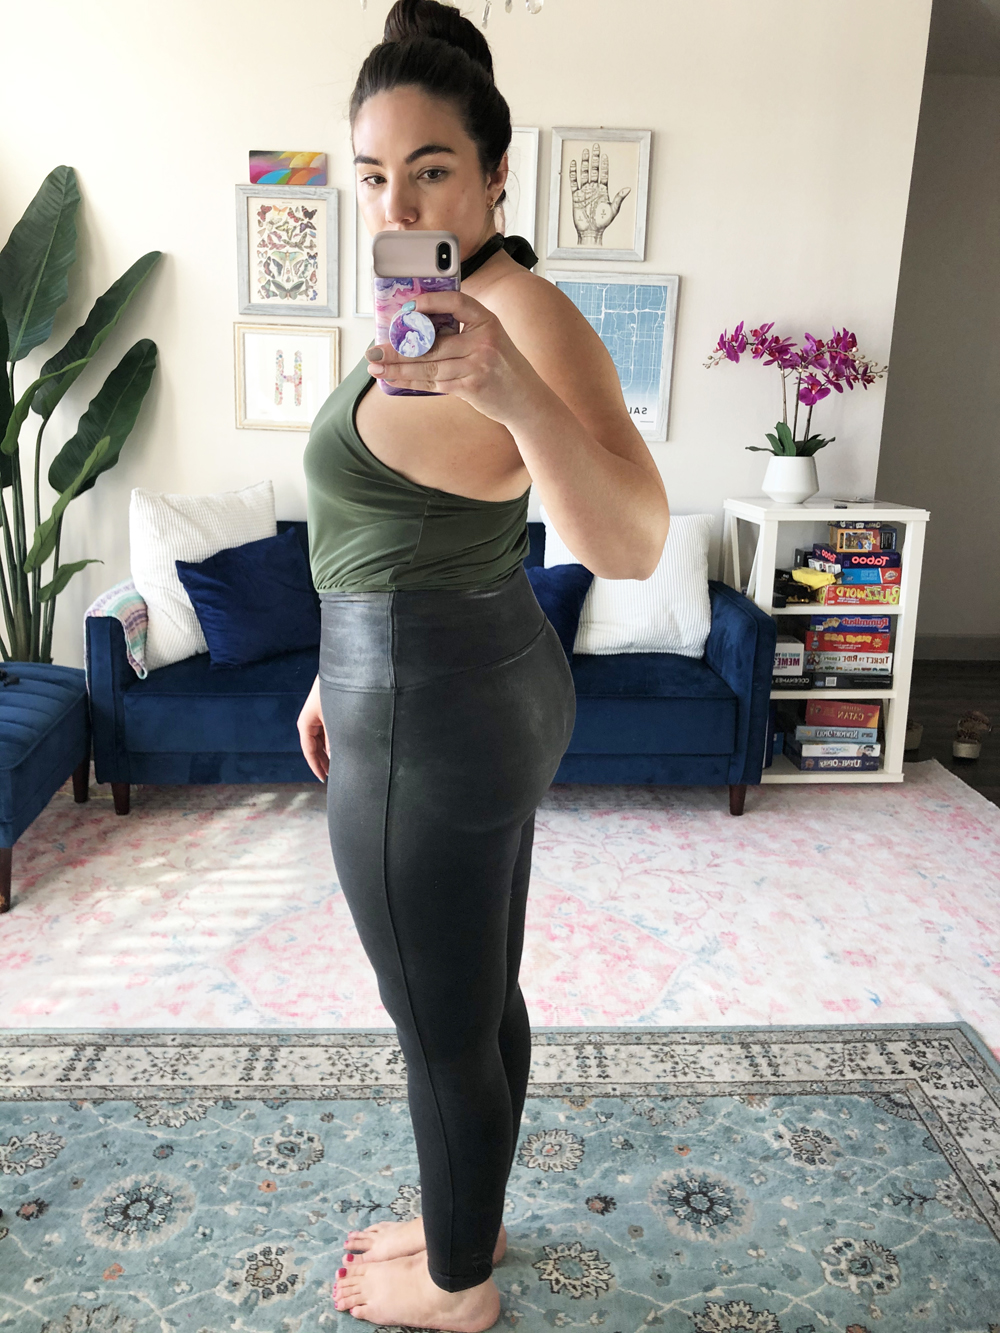 Sharing my fav spanx since they are on sale! Size 14 style, spanx